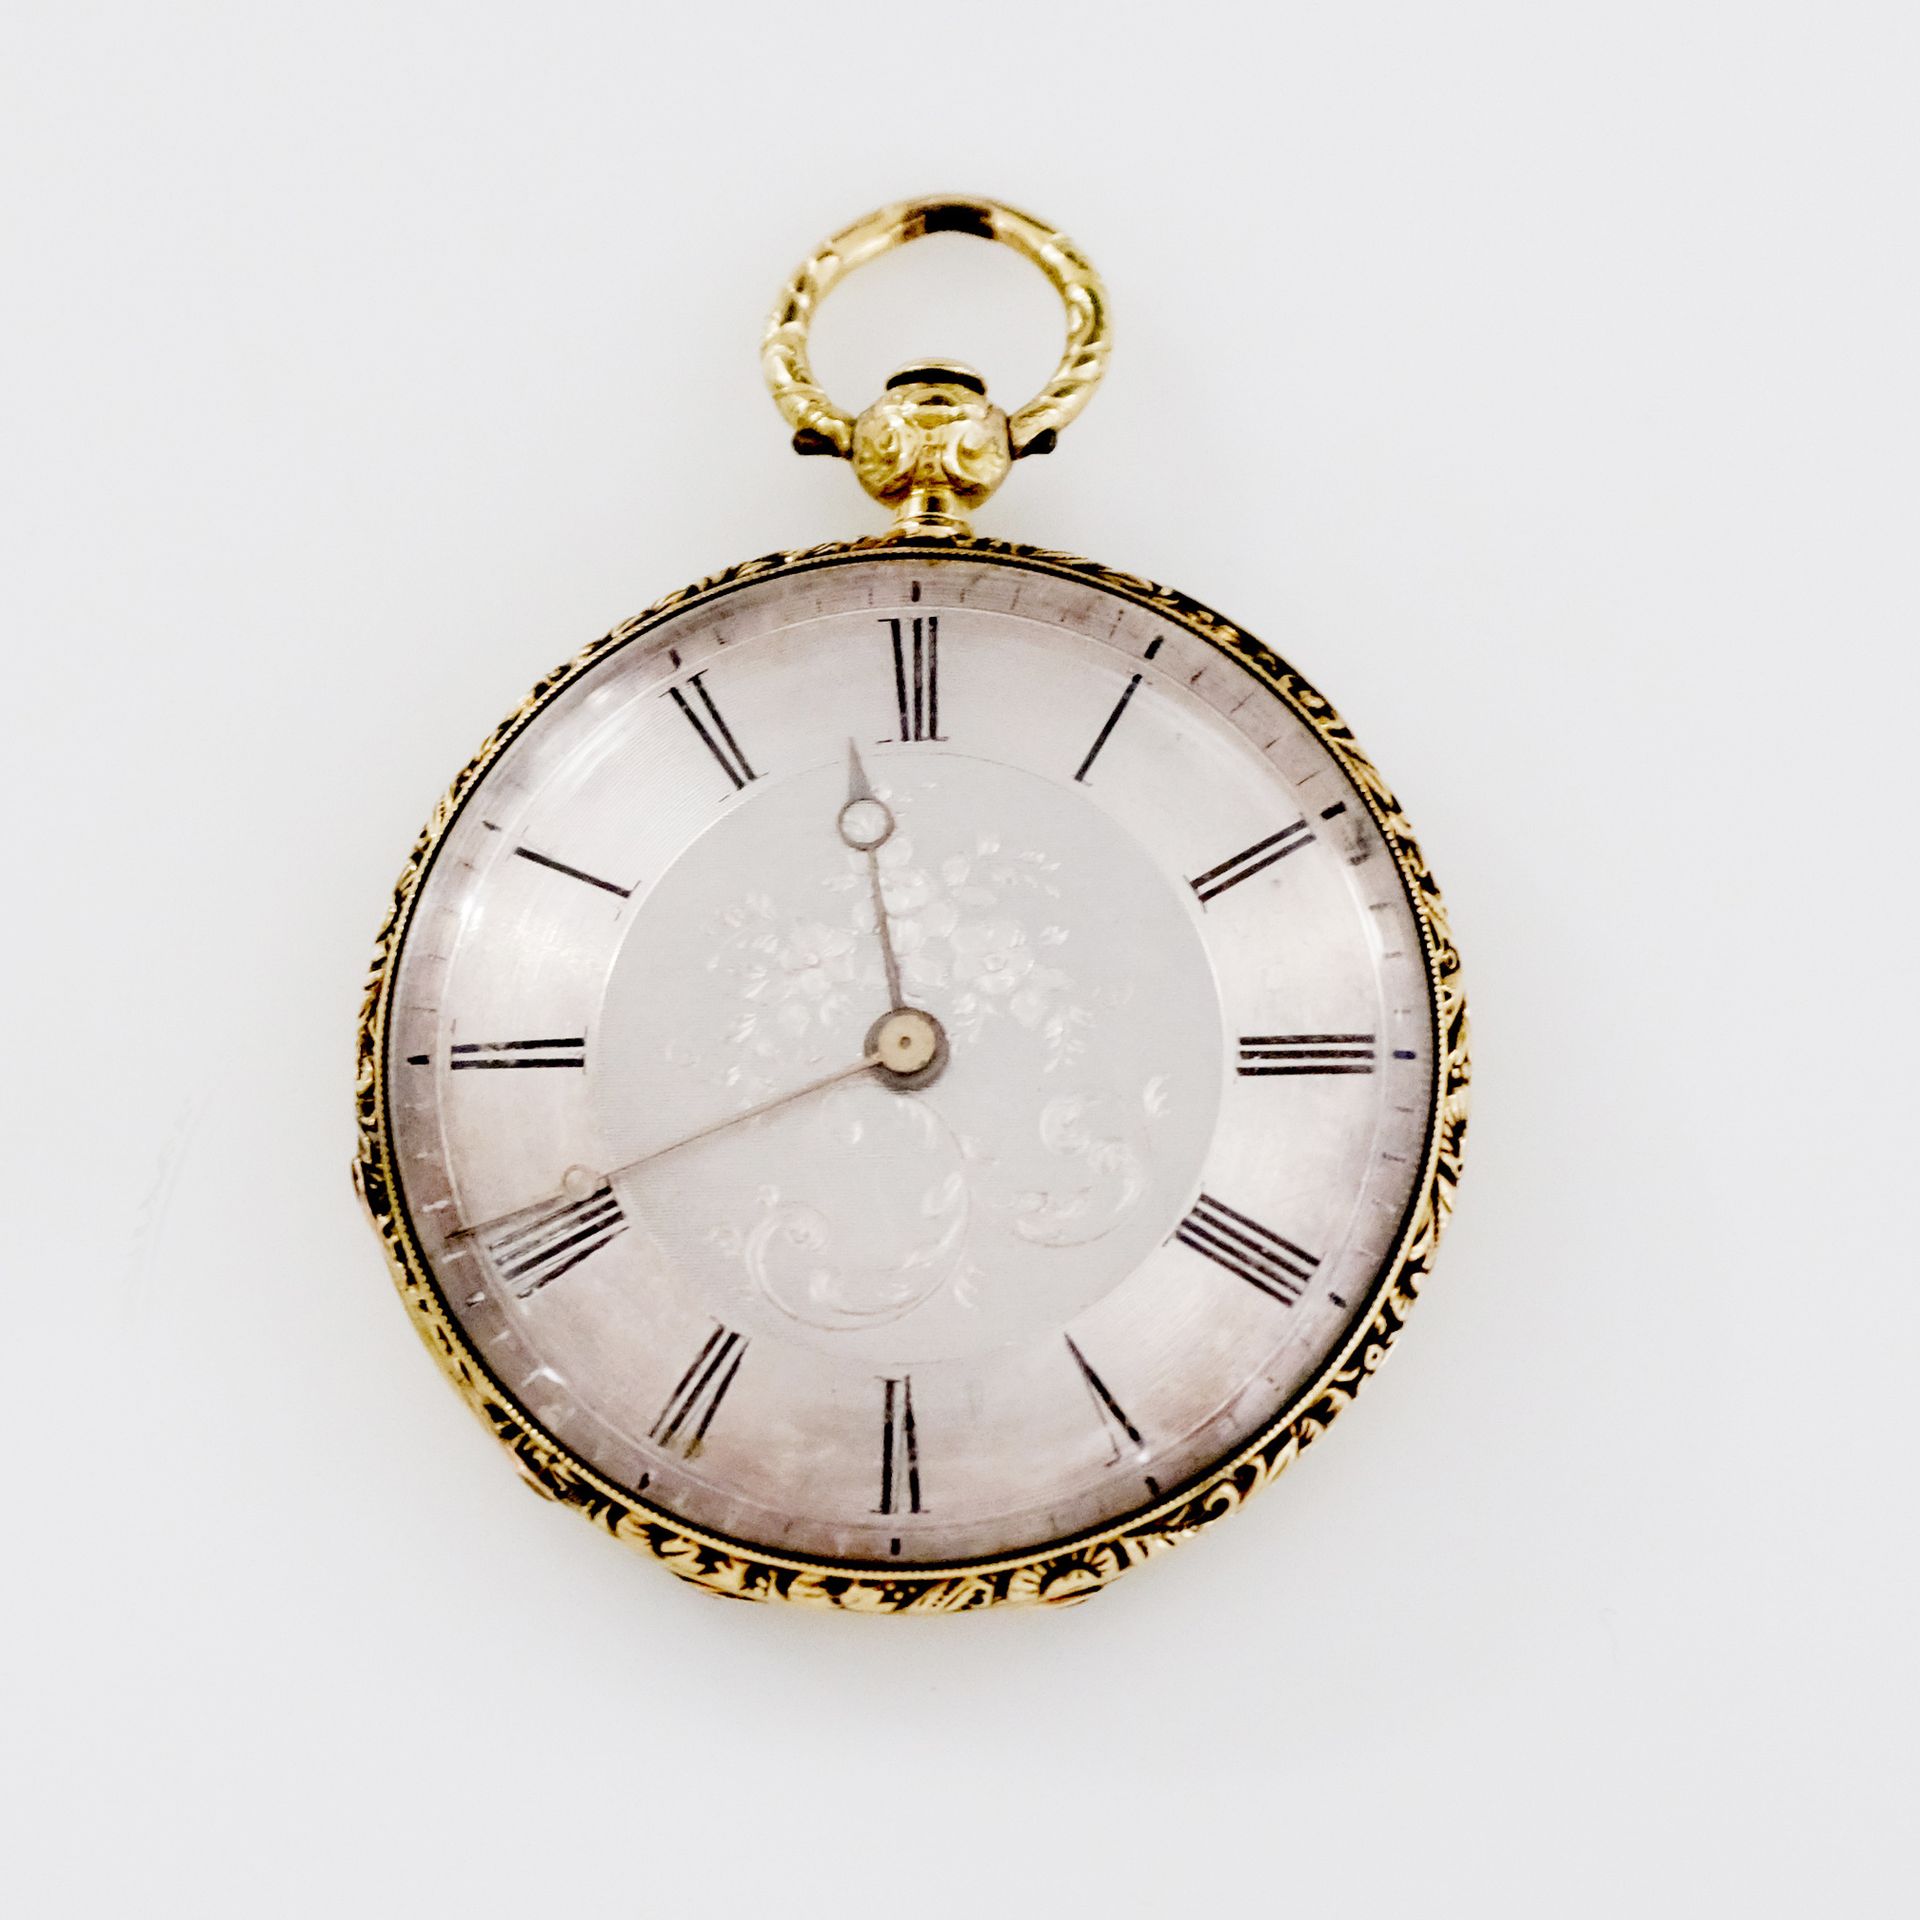 LEROY à Paris 18k (750) yellow gold pocket watch, chased silver dial, Roman nume&hellip;